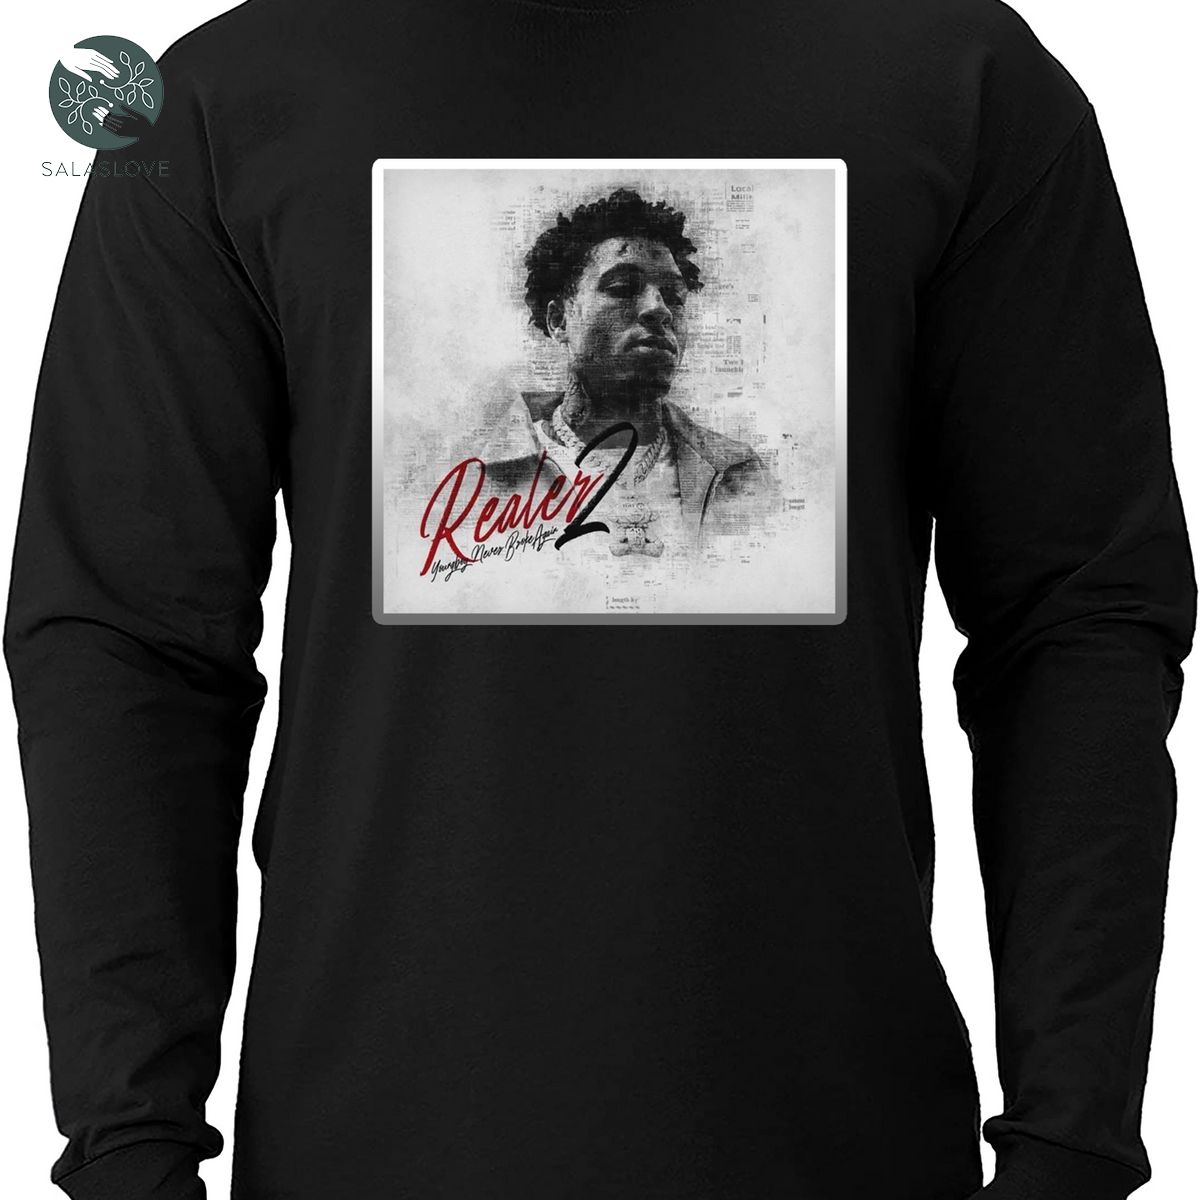 NBA YoungBoy With New Song Dangerous Love T-shirt